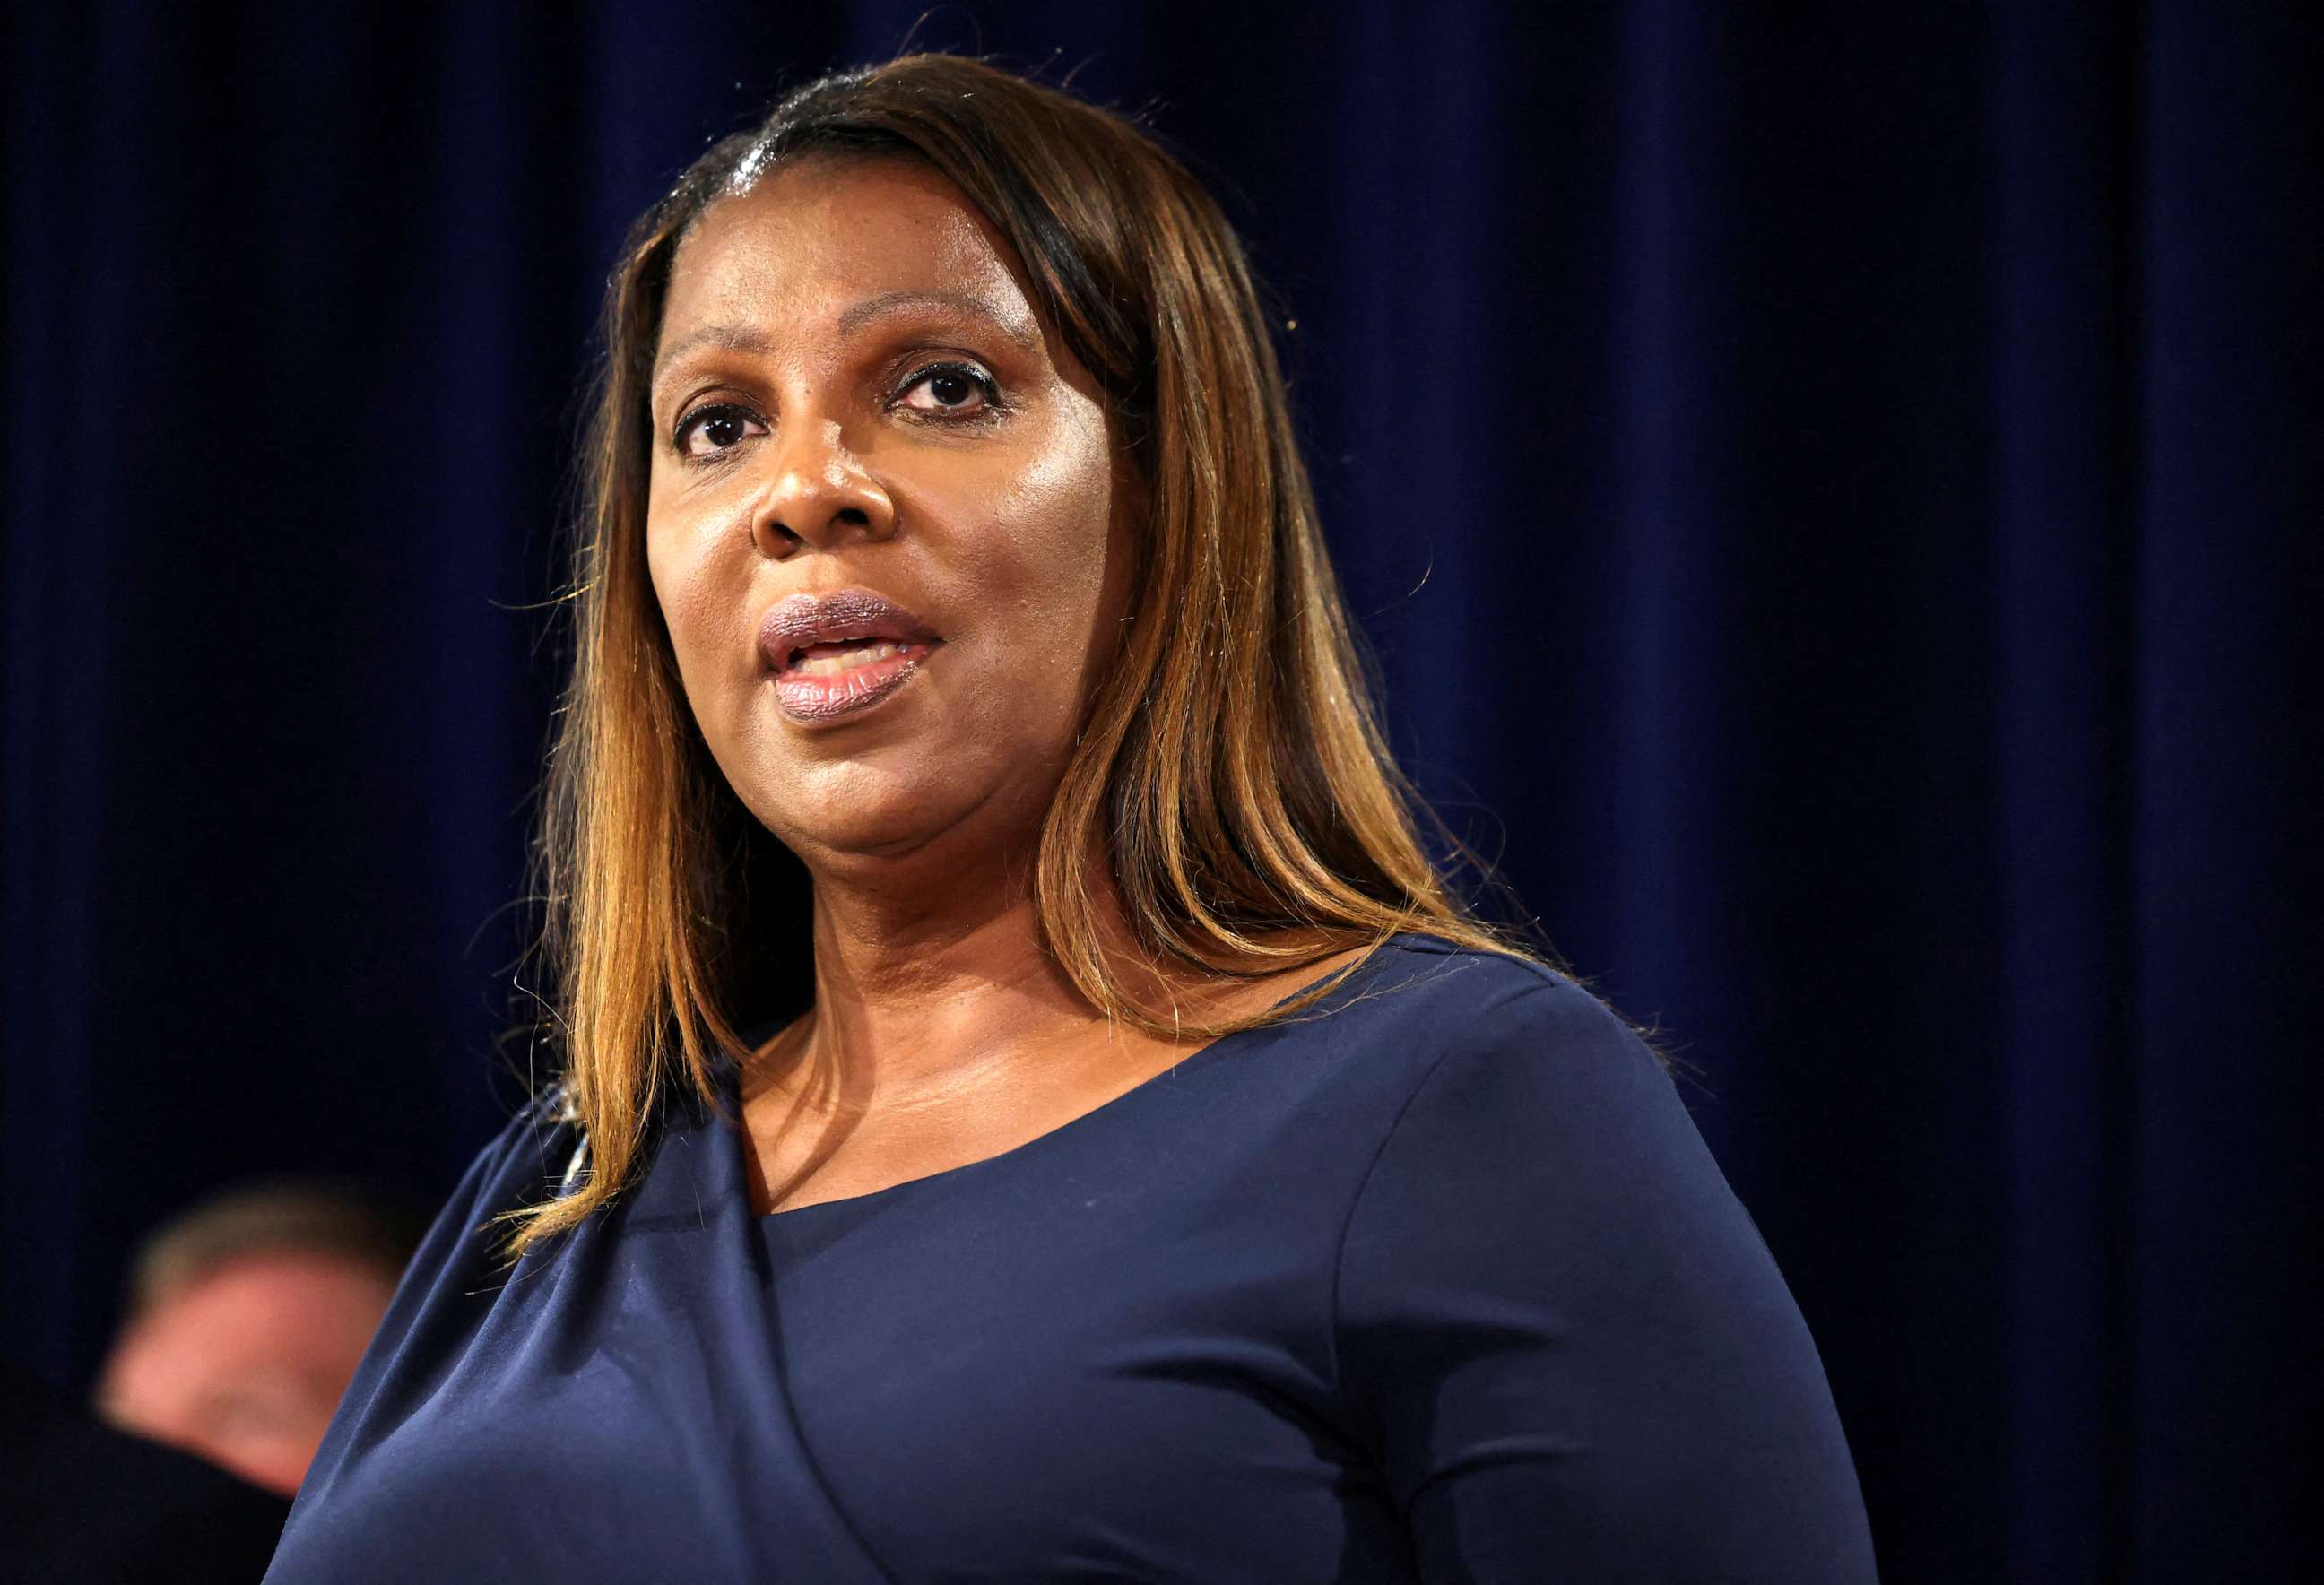 PHOTO: In this Sept. 8, 2022, file photo, New York State Attorney General Letitia James speaks at a news conference in New York.